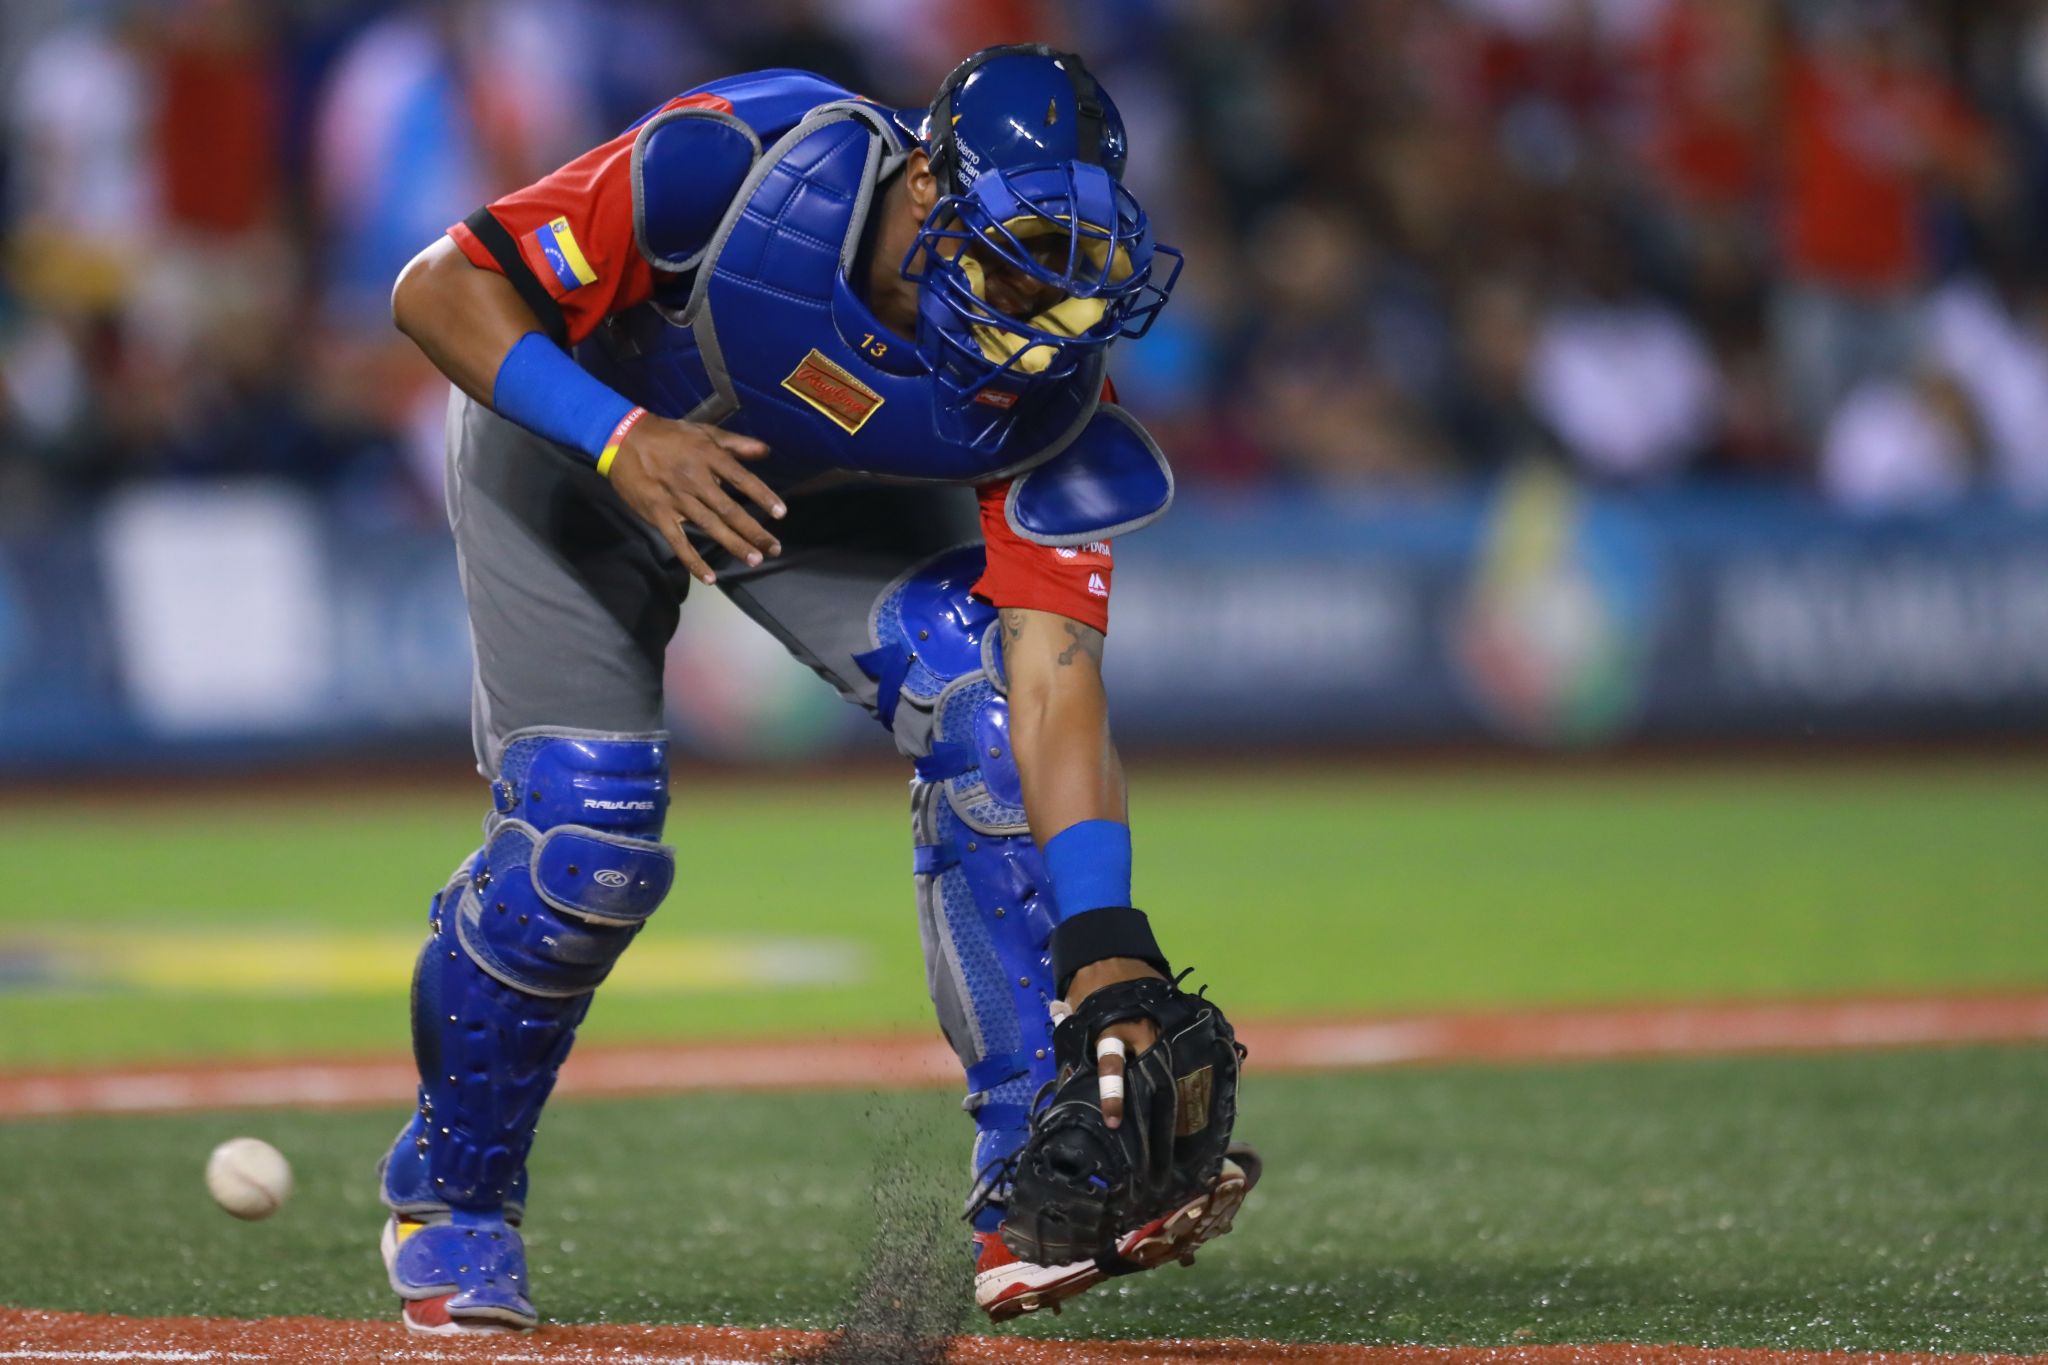 Royals catcher Perez set for test on knee injured in WBC